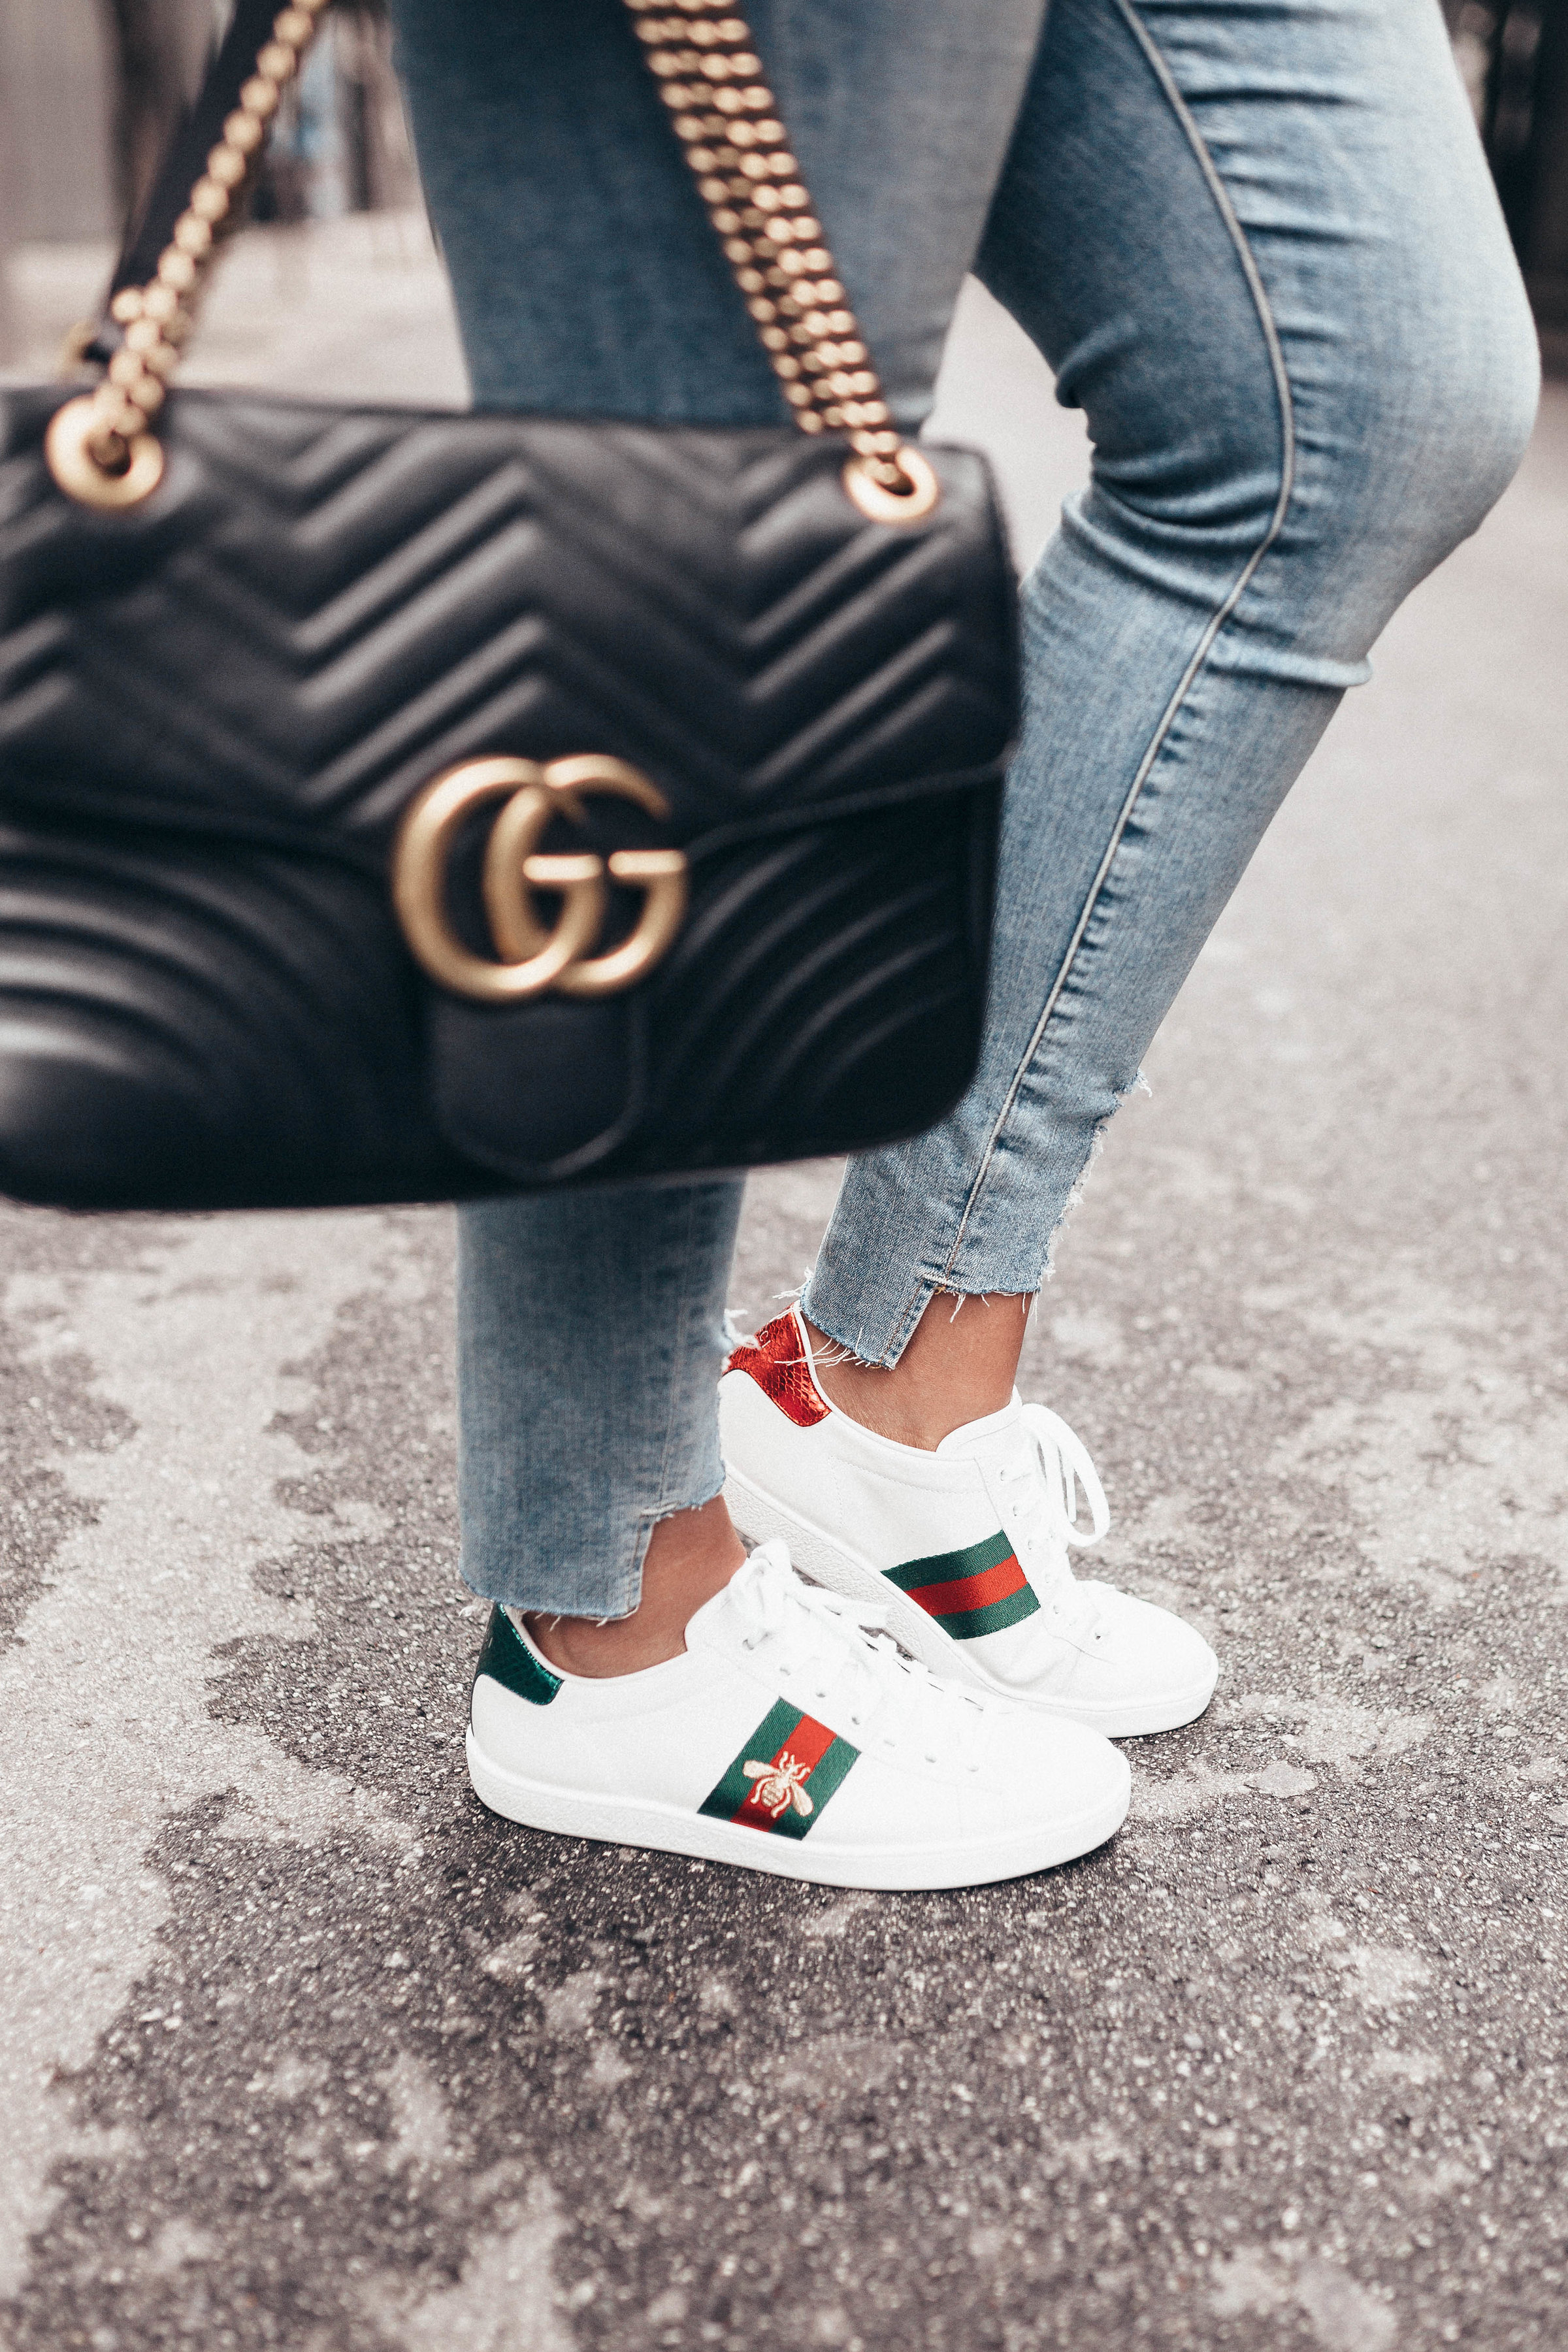 How to Clean Gucci Sneakers (or any shoes) - Ashley & Emily